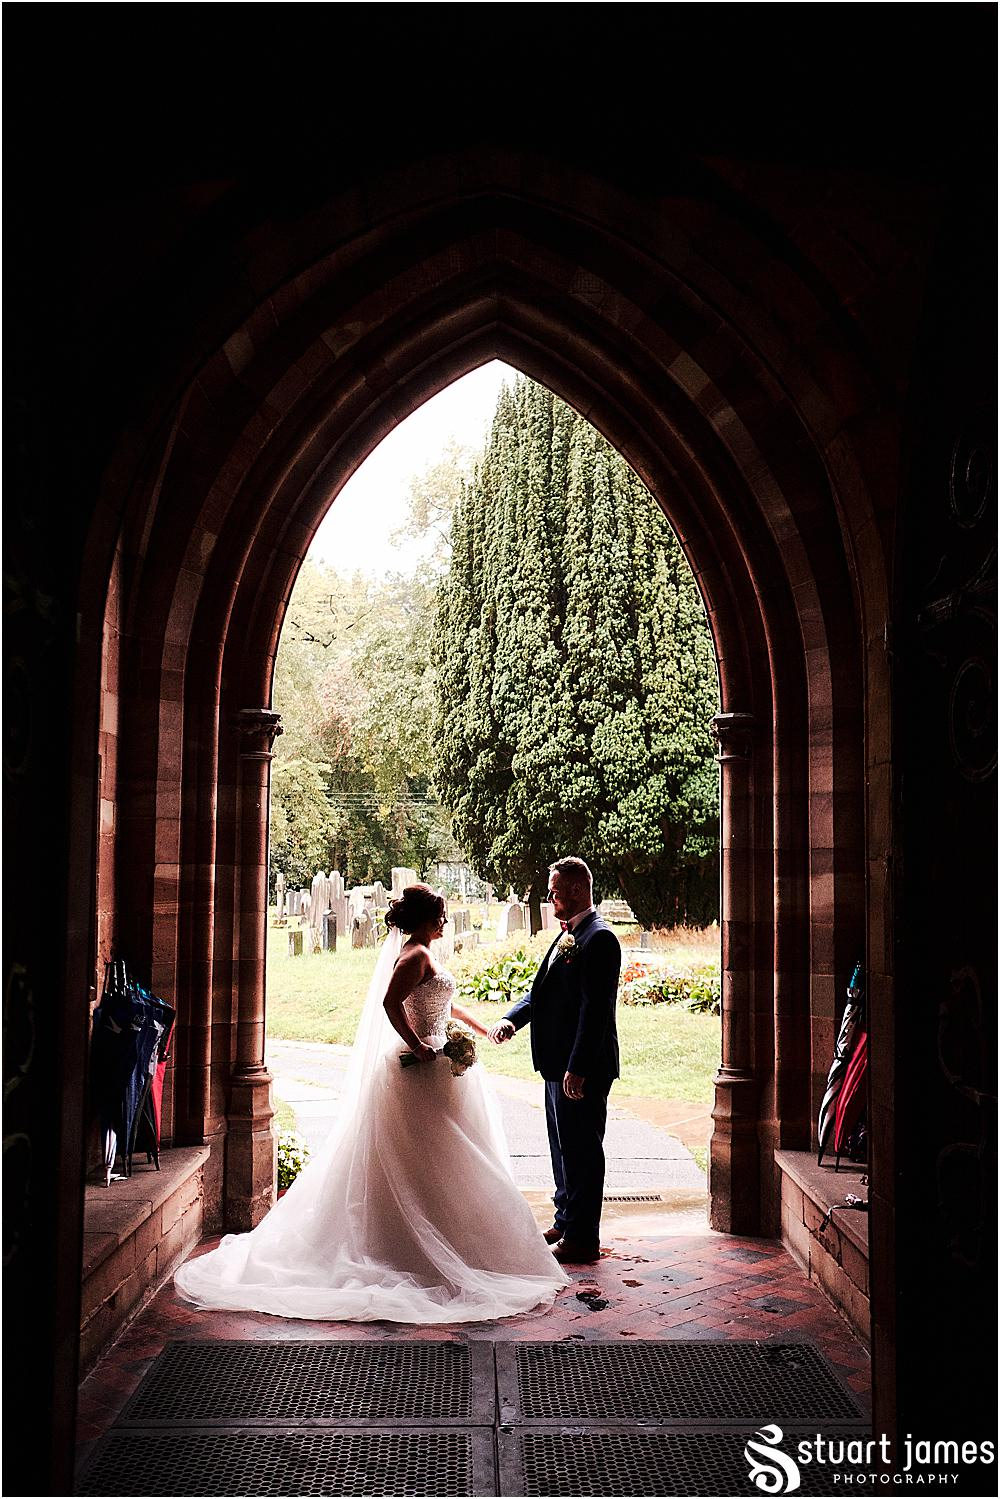 Bride and Groom stand in Chruch arch holding hands, photo by Stuart James Photography at Holy Trinity, Eccleshall